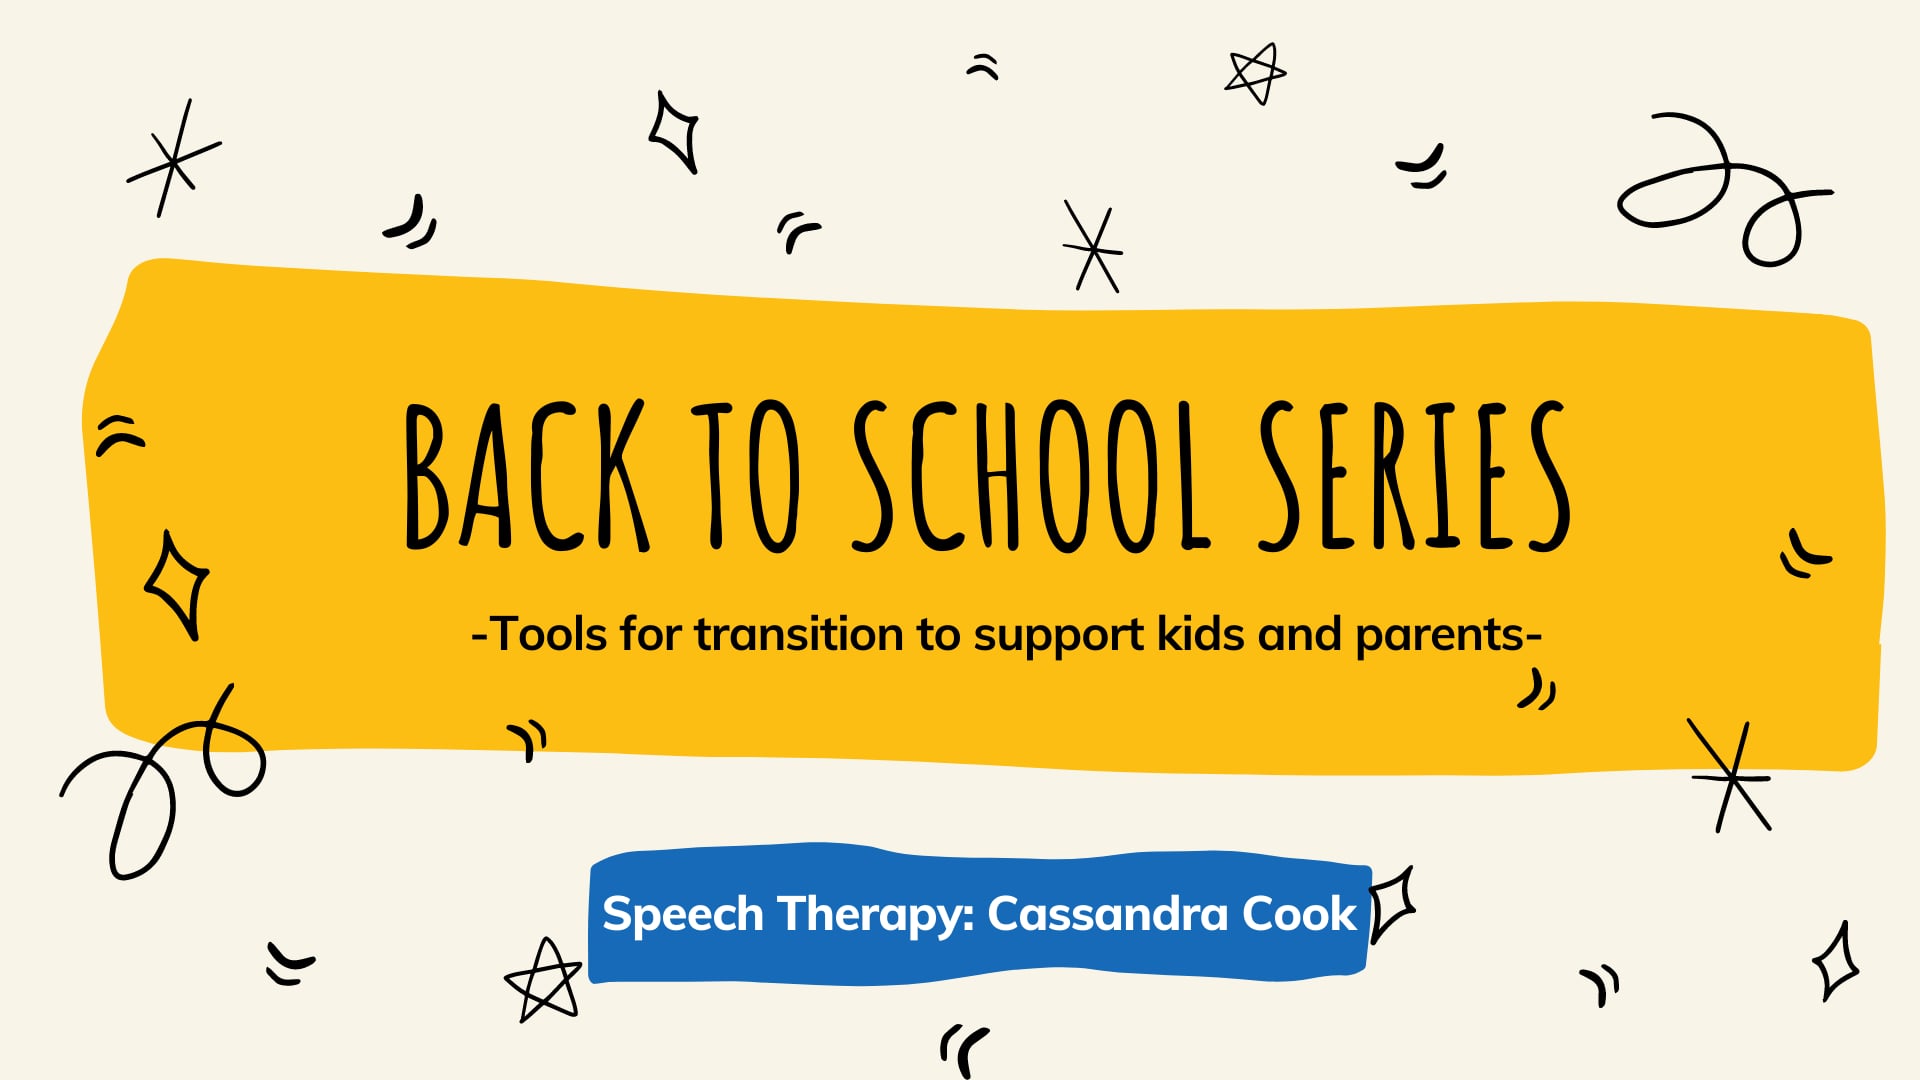 Back to School Series: Speech Therapy